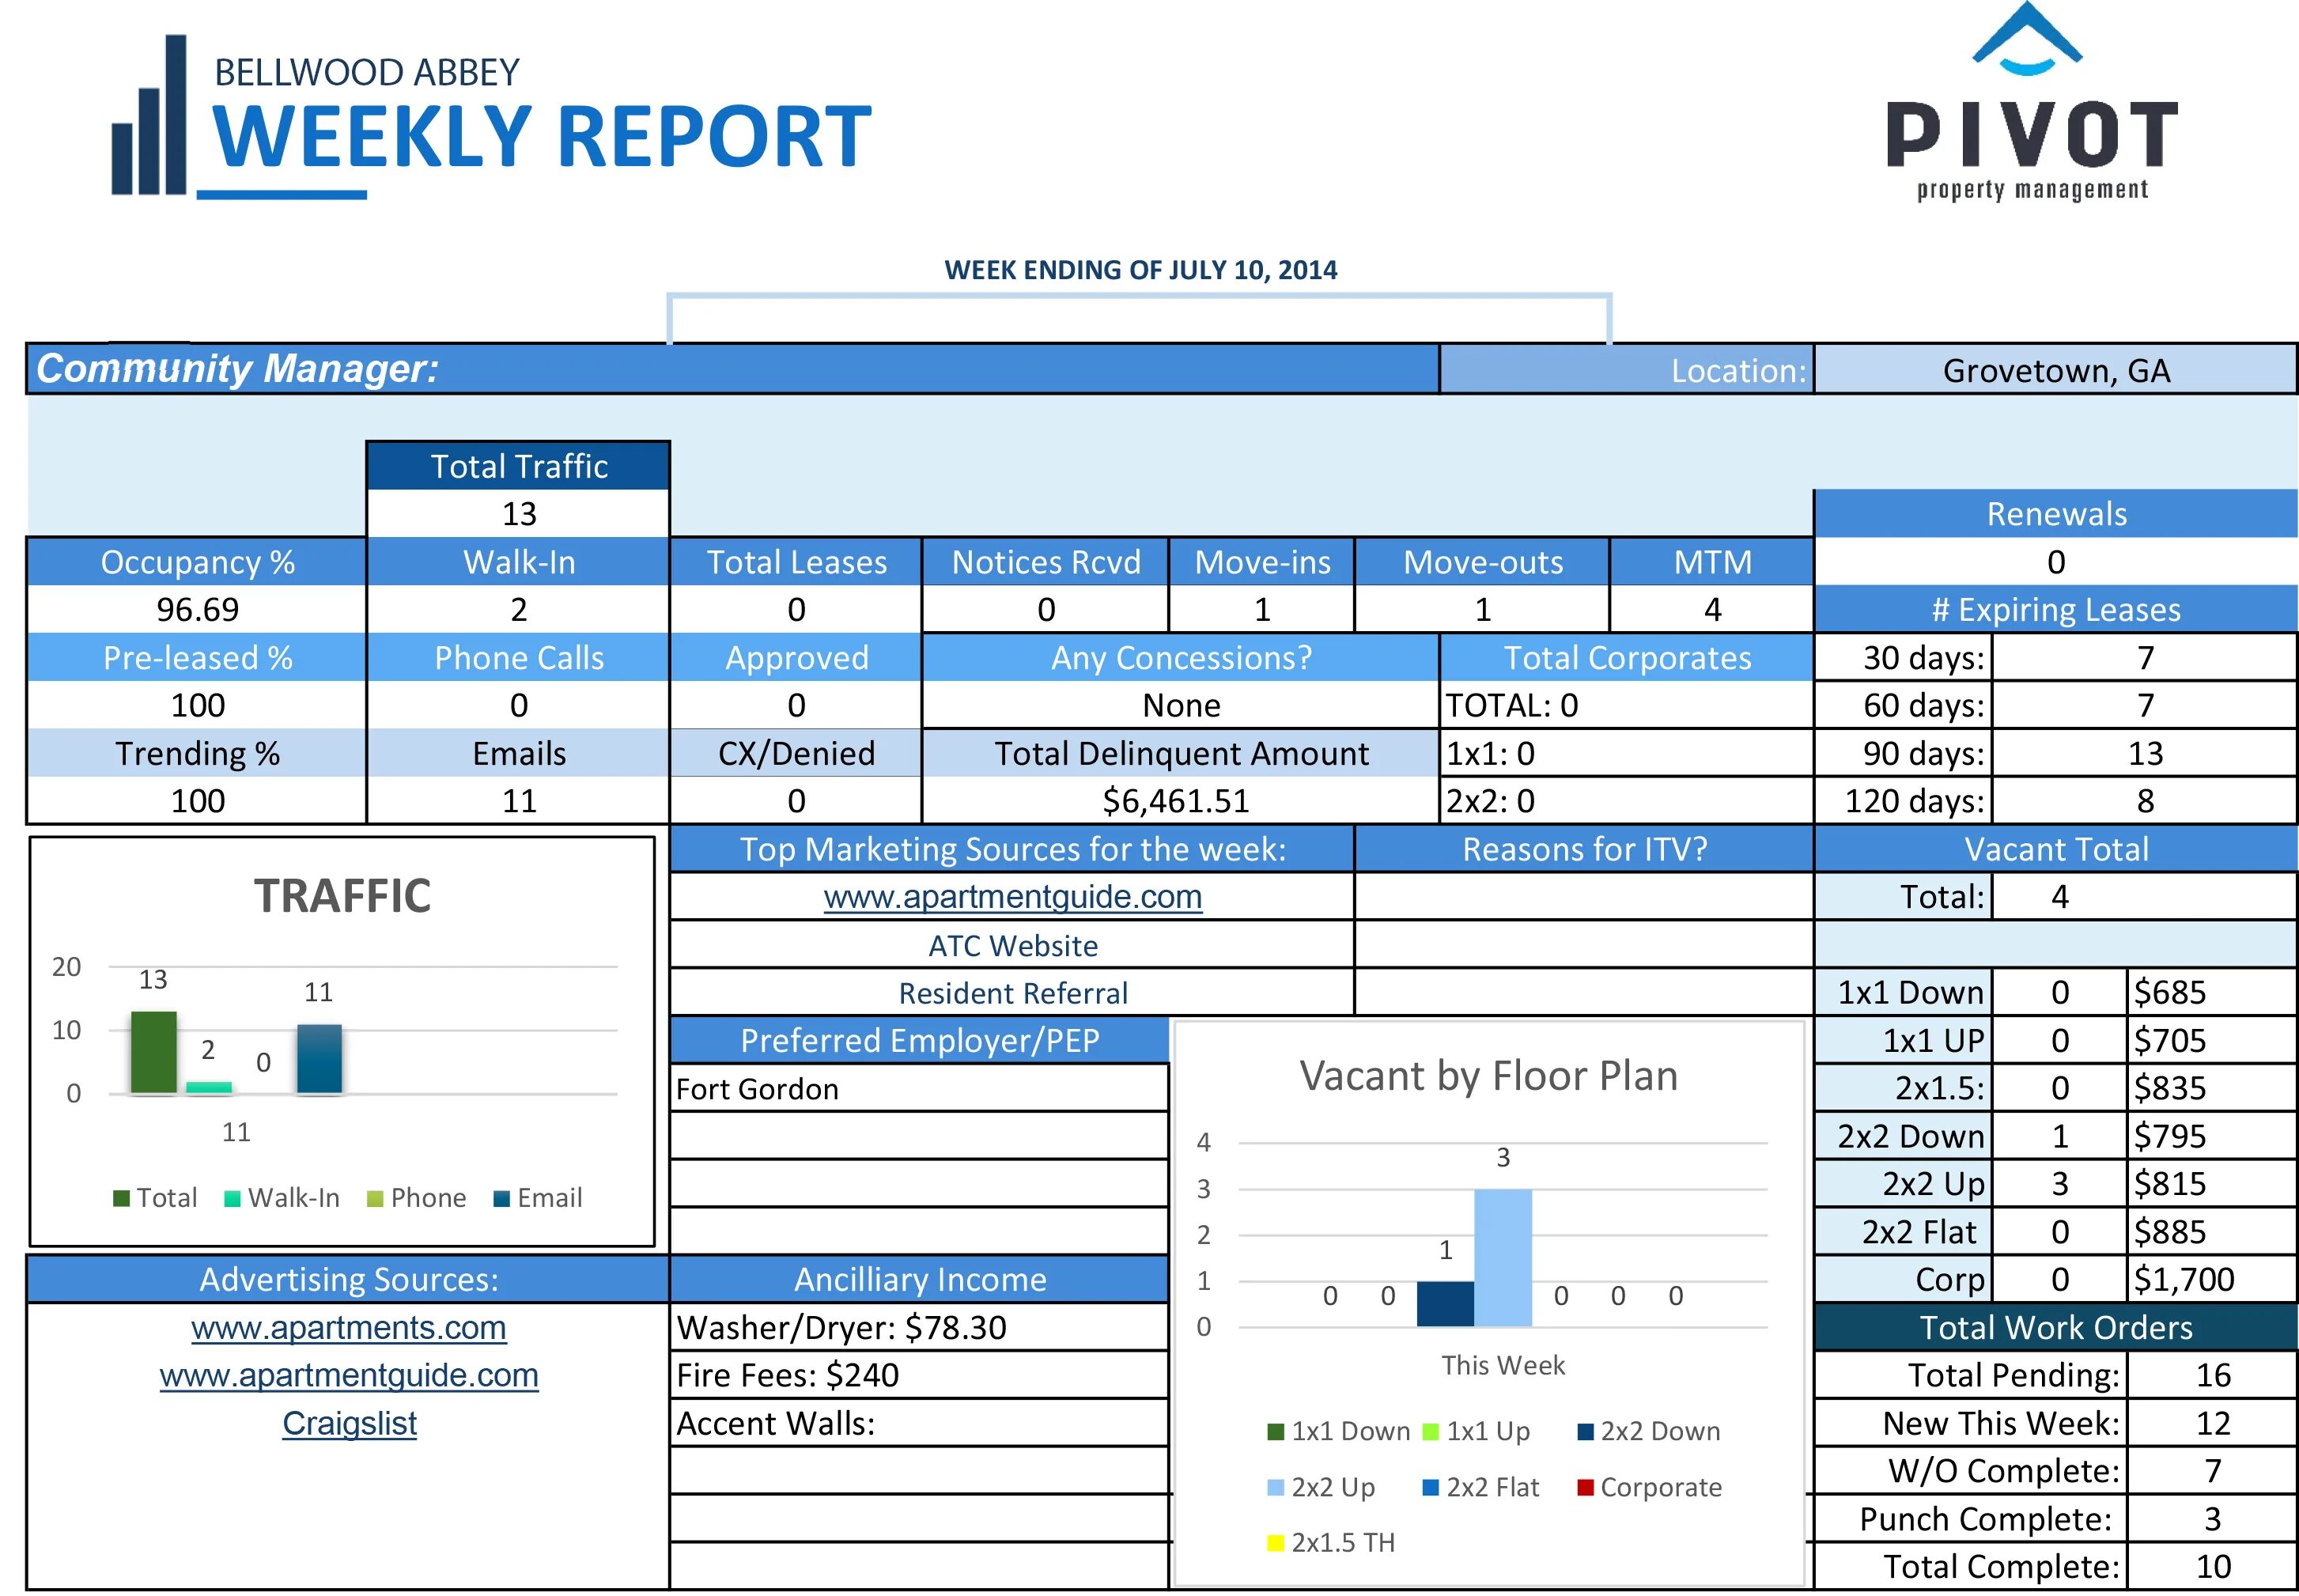 Management Report примеры. Weekly Report. Management Report пример заполнения. Lead Manager отчет. Report manager